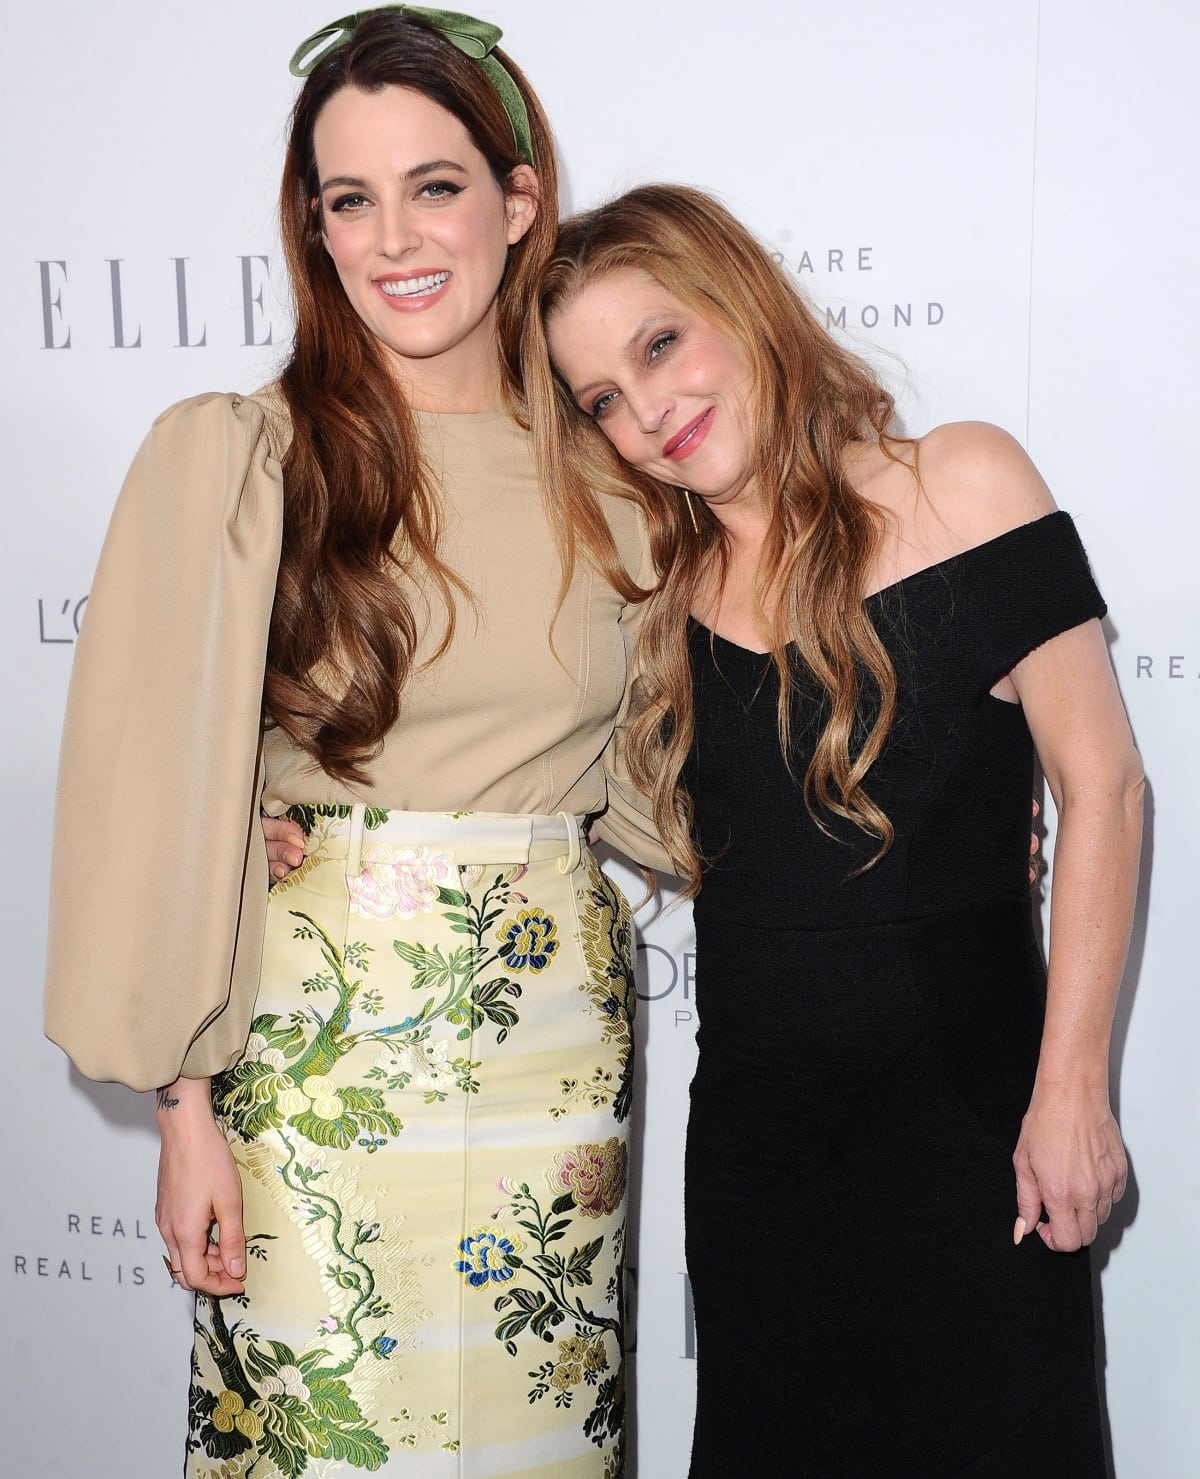 Riley Keough with mom Lisa Marie Presley at the ELLE Women in Hollywood event